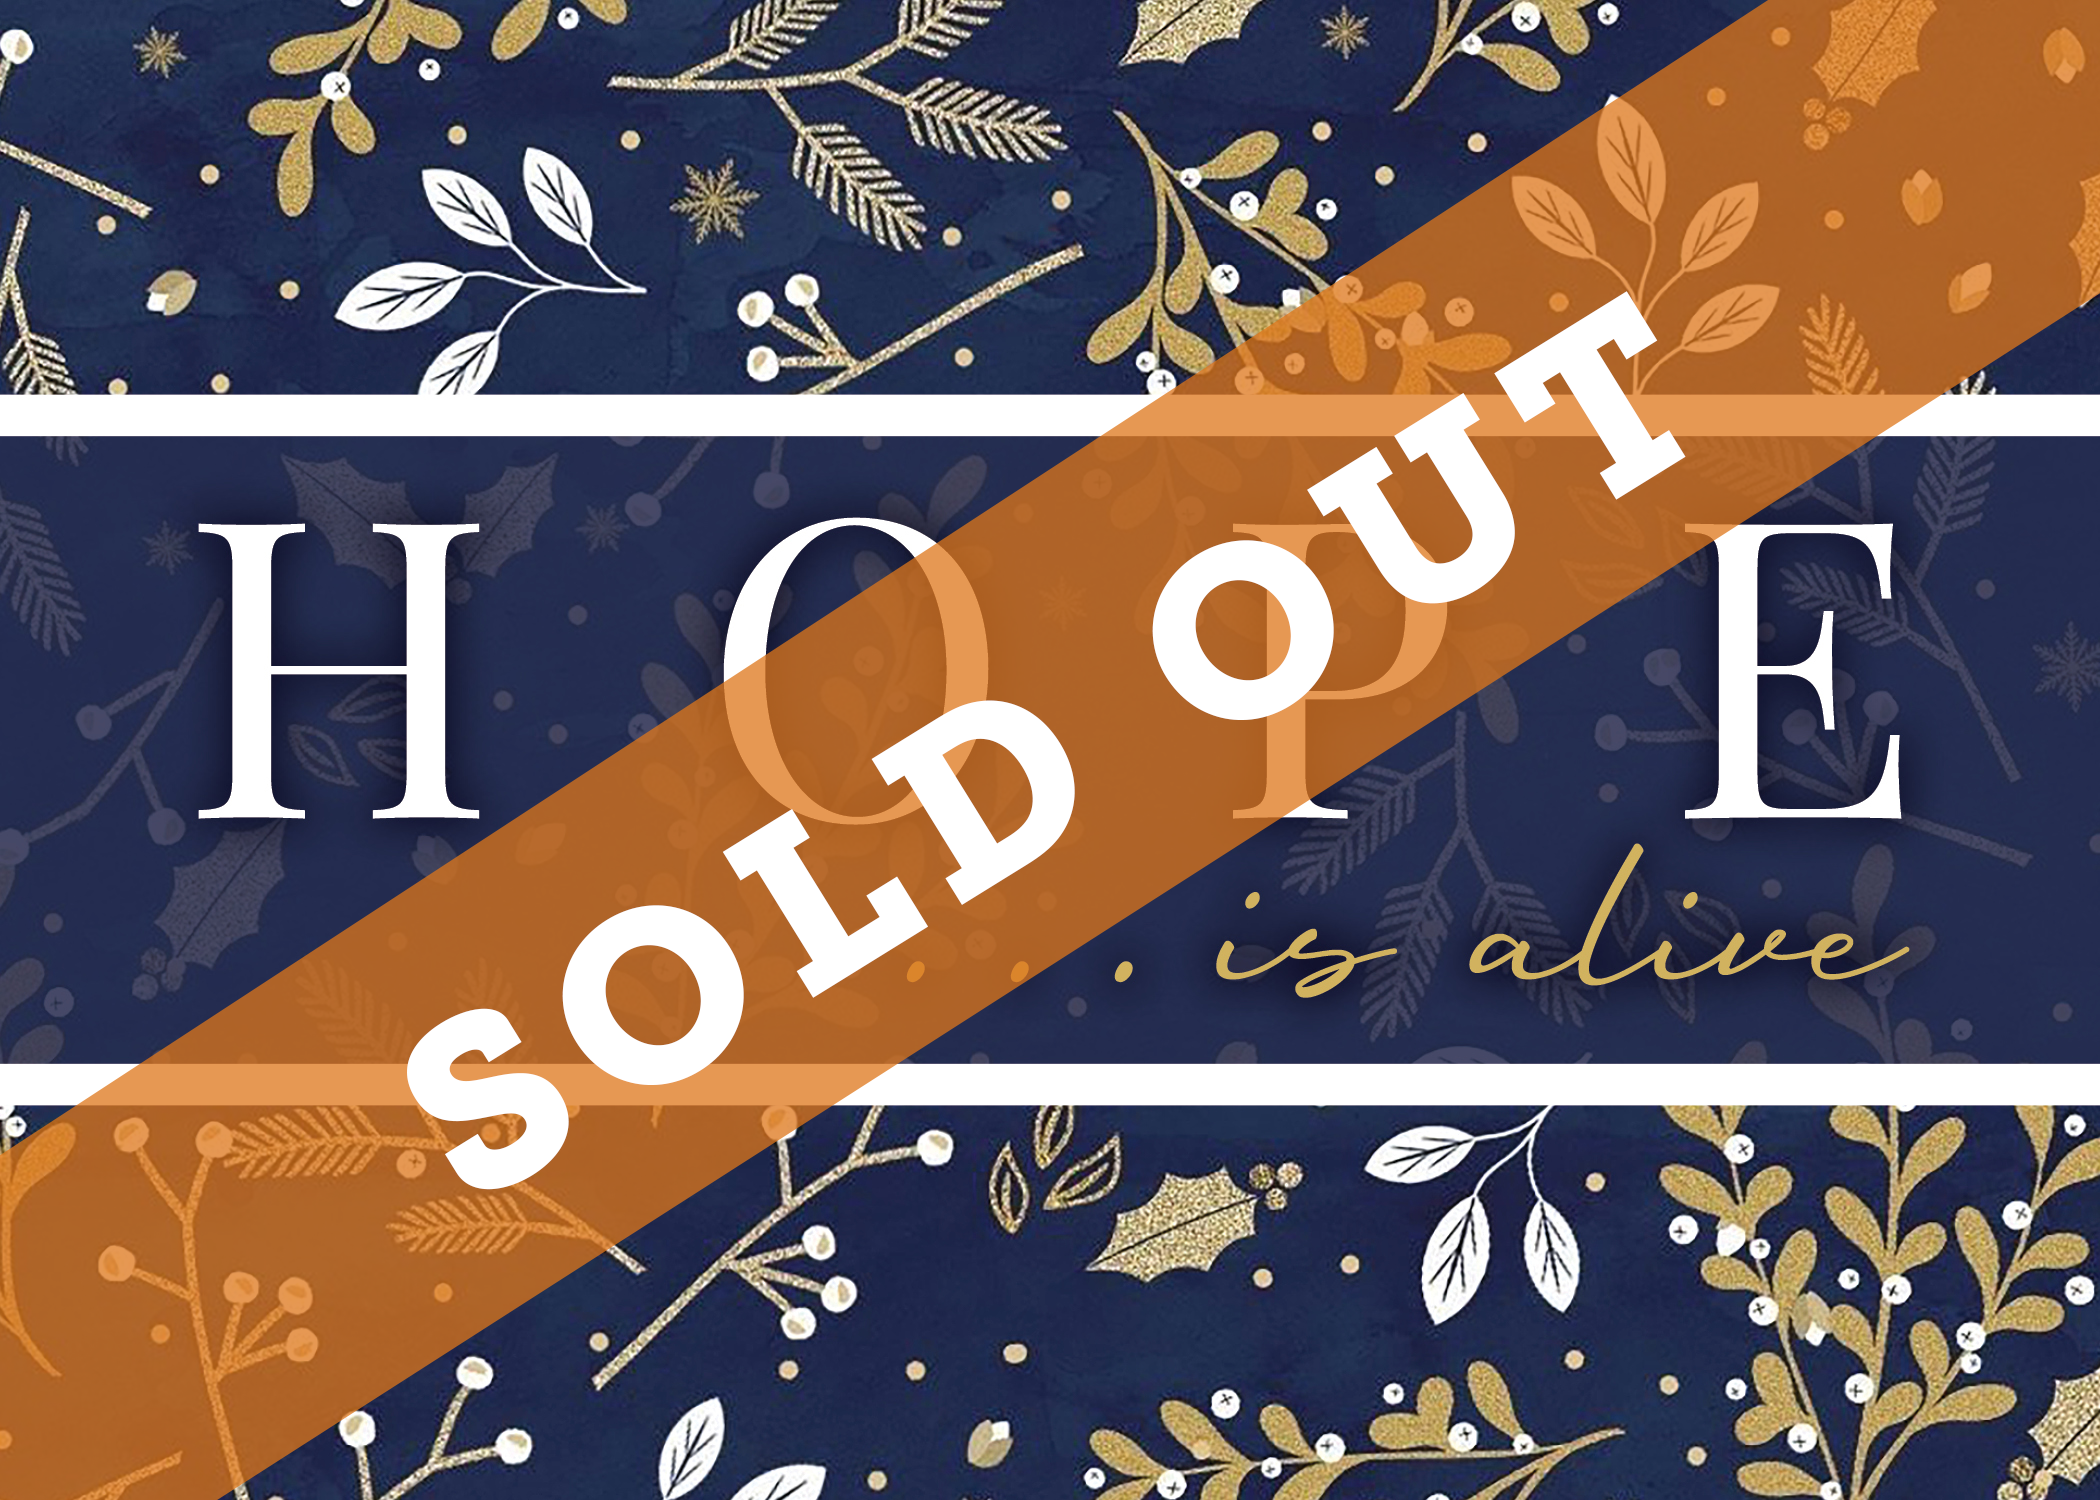 SOLD OUT! - Hope is Alive